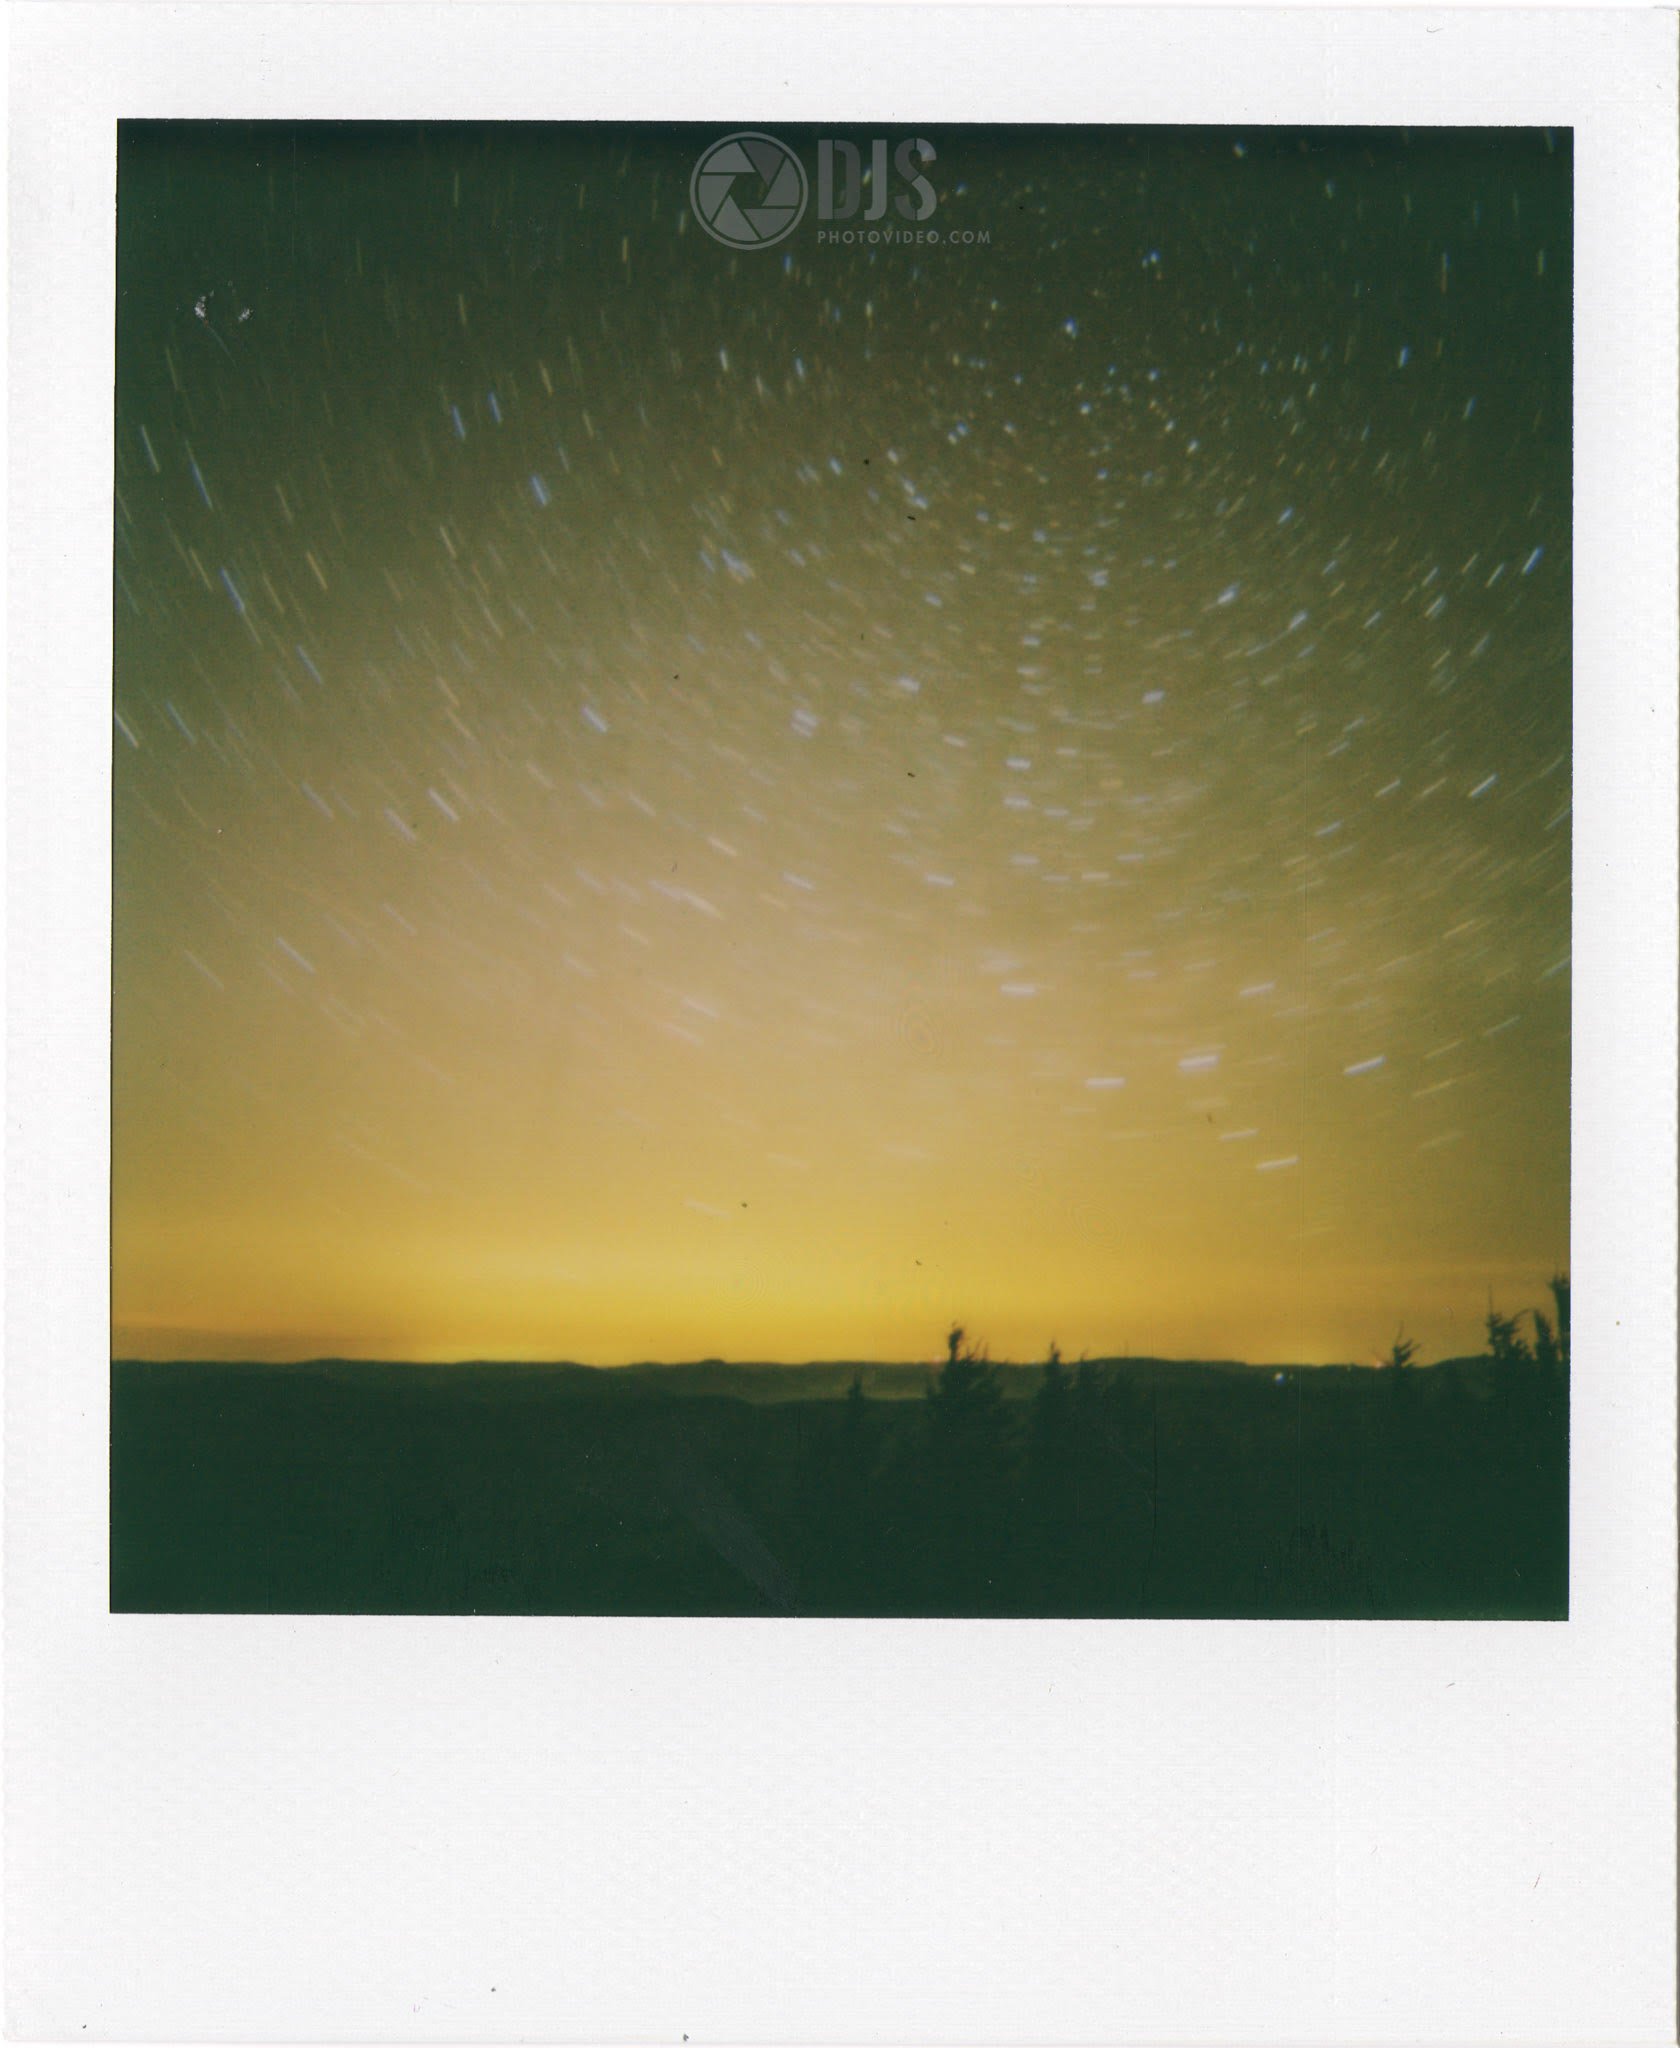 More Stunning Astrophotography Shot Using Polaroid Instant Camera